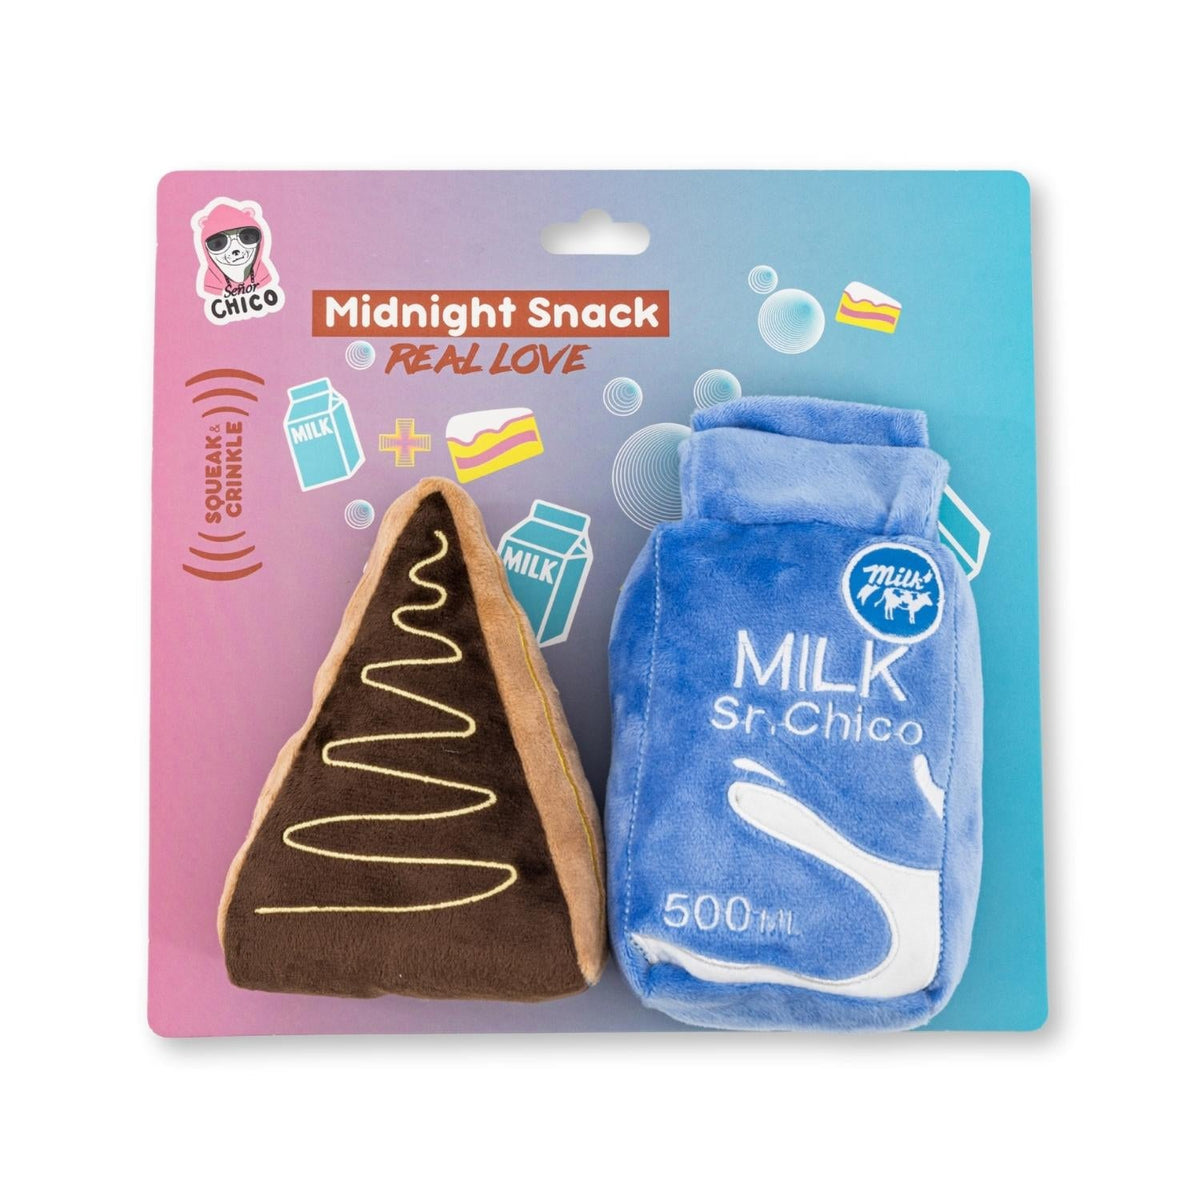 Midnight Snack Two-Piece Plush Dog Toy Gift Set: Cake Slice and Milk Design by American Pet Supplies